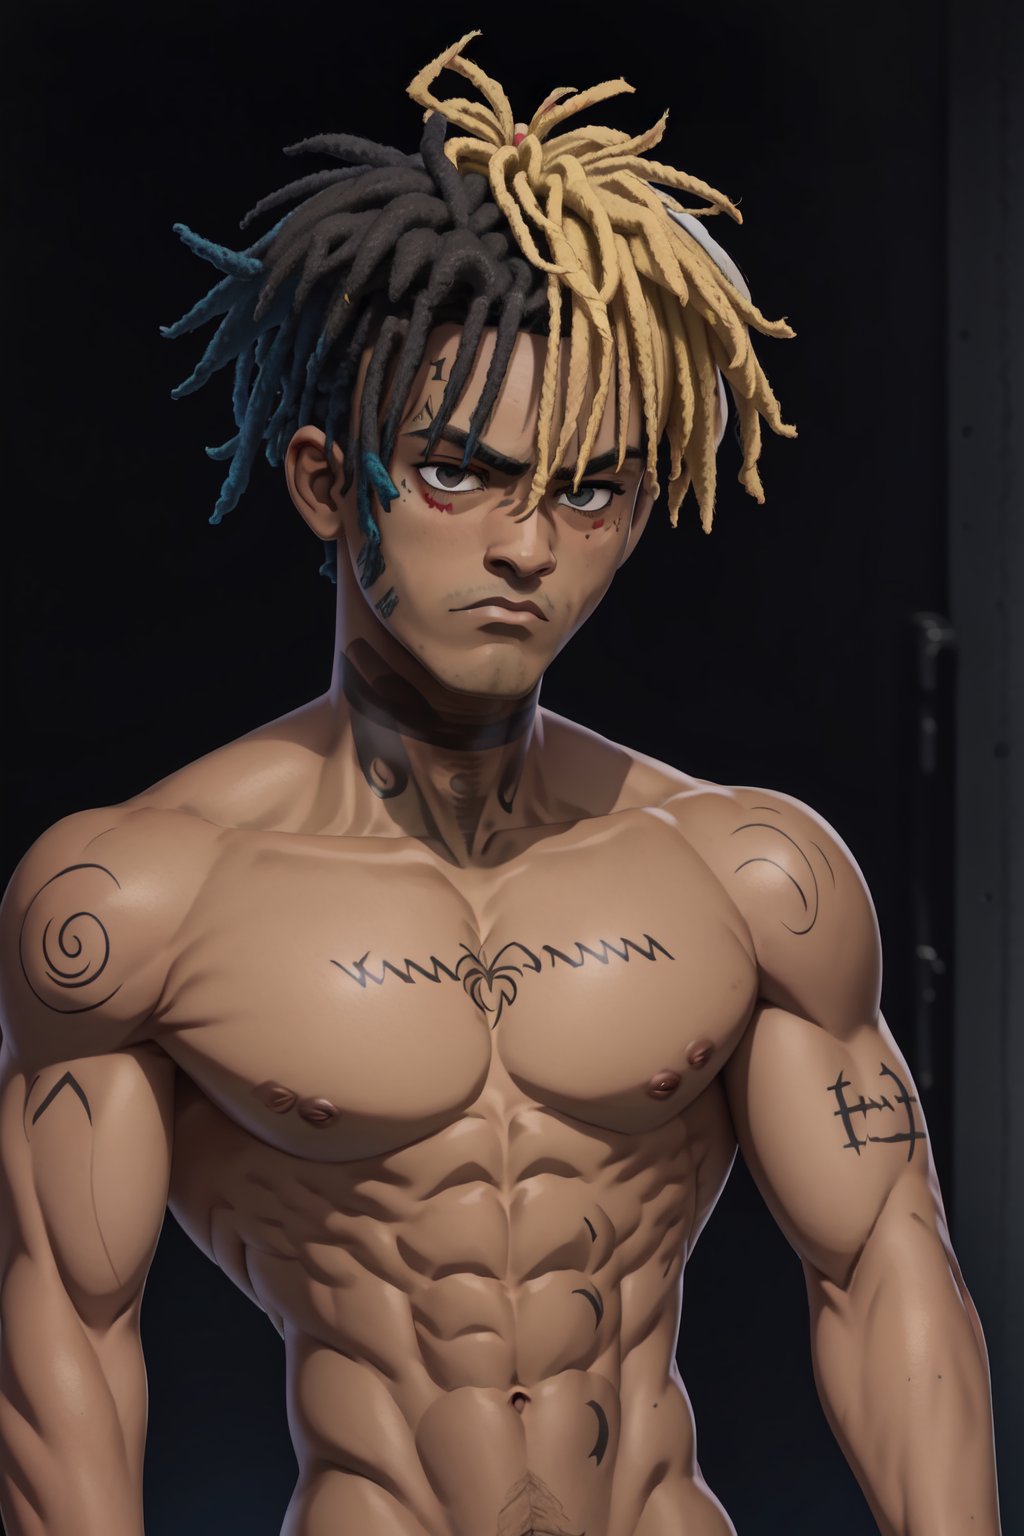 1man, dark skin, half black and half blond dreadlocks, tattoos on his face, upper body, shirtless, body marked muscles, serious and depressed face